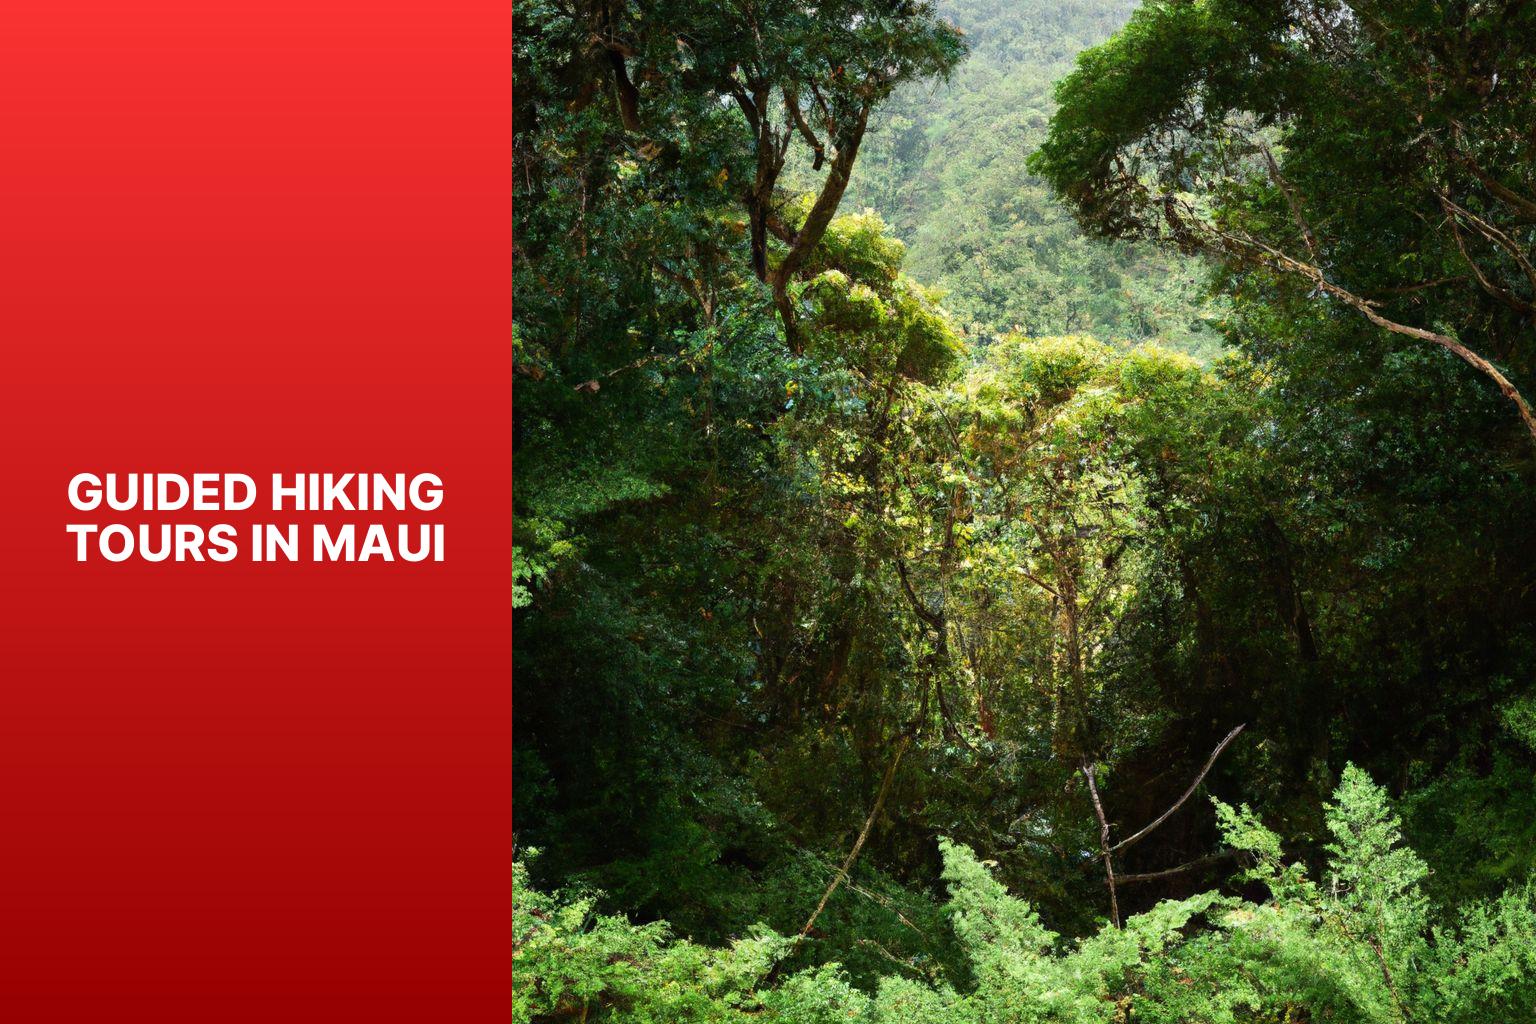 Guided Hiking Tours in Maui - Where to Hike in Maui 